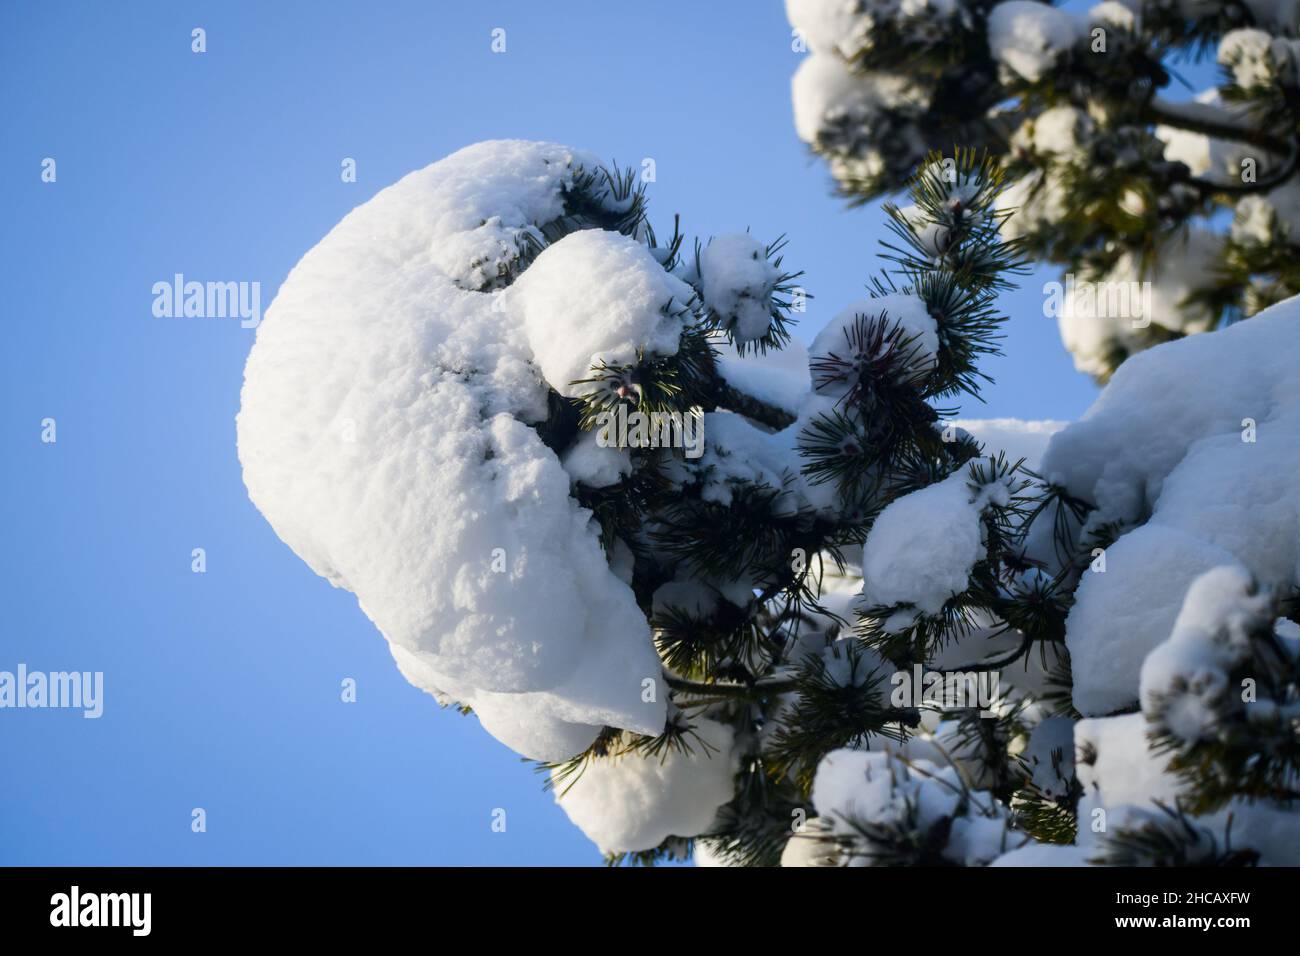 Selective focus photo. Snow covered branch of pine tree. Stock Photo